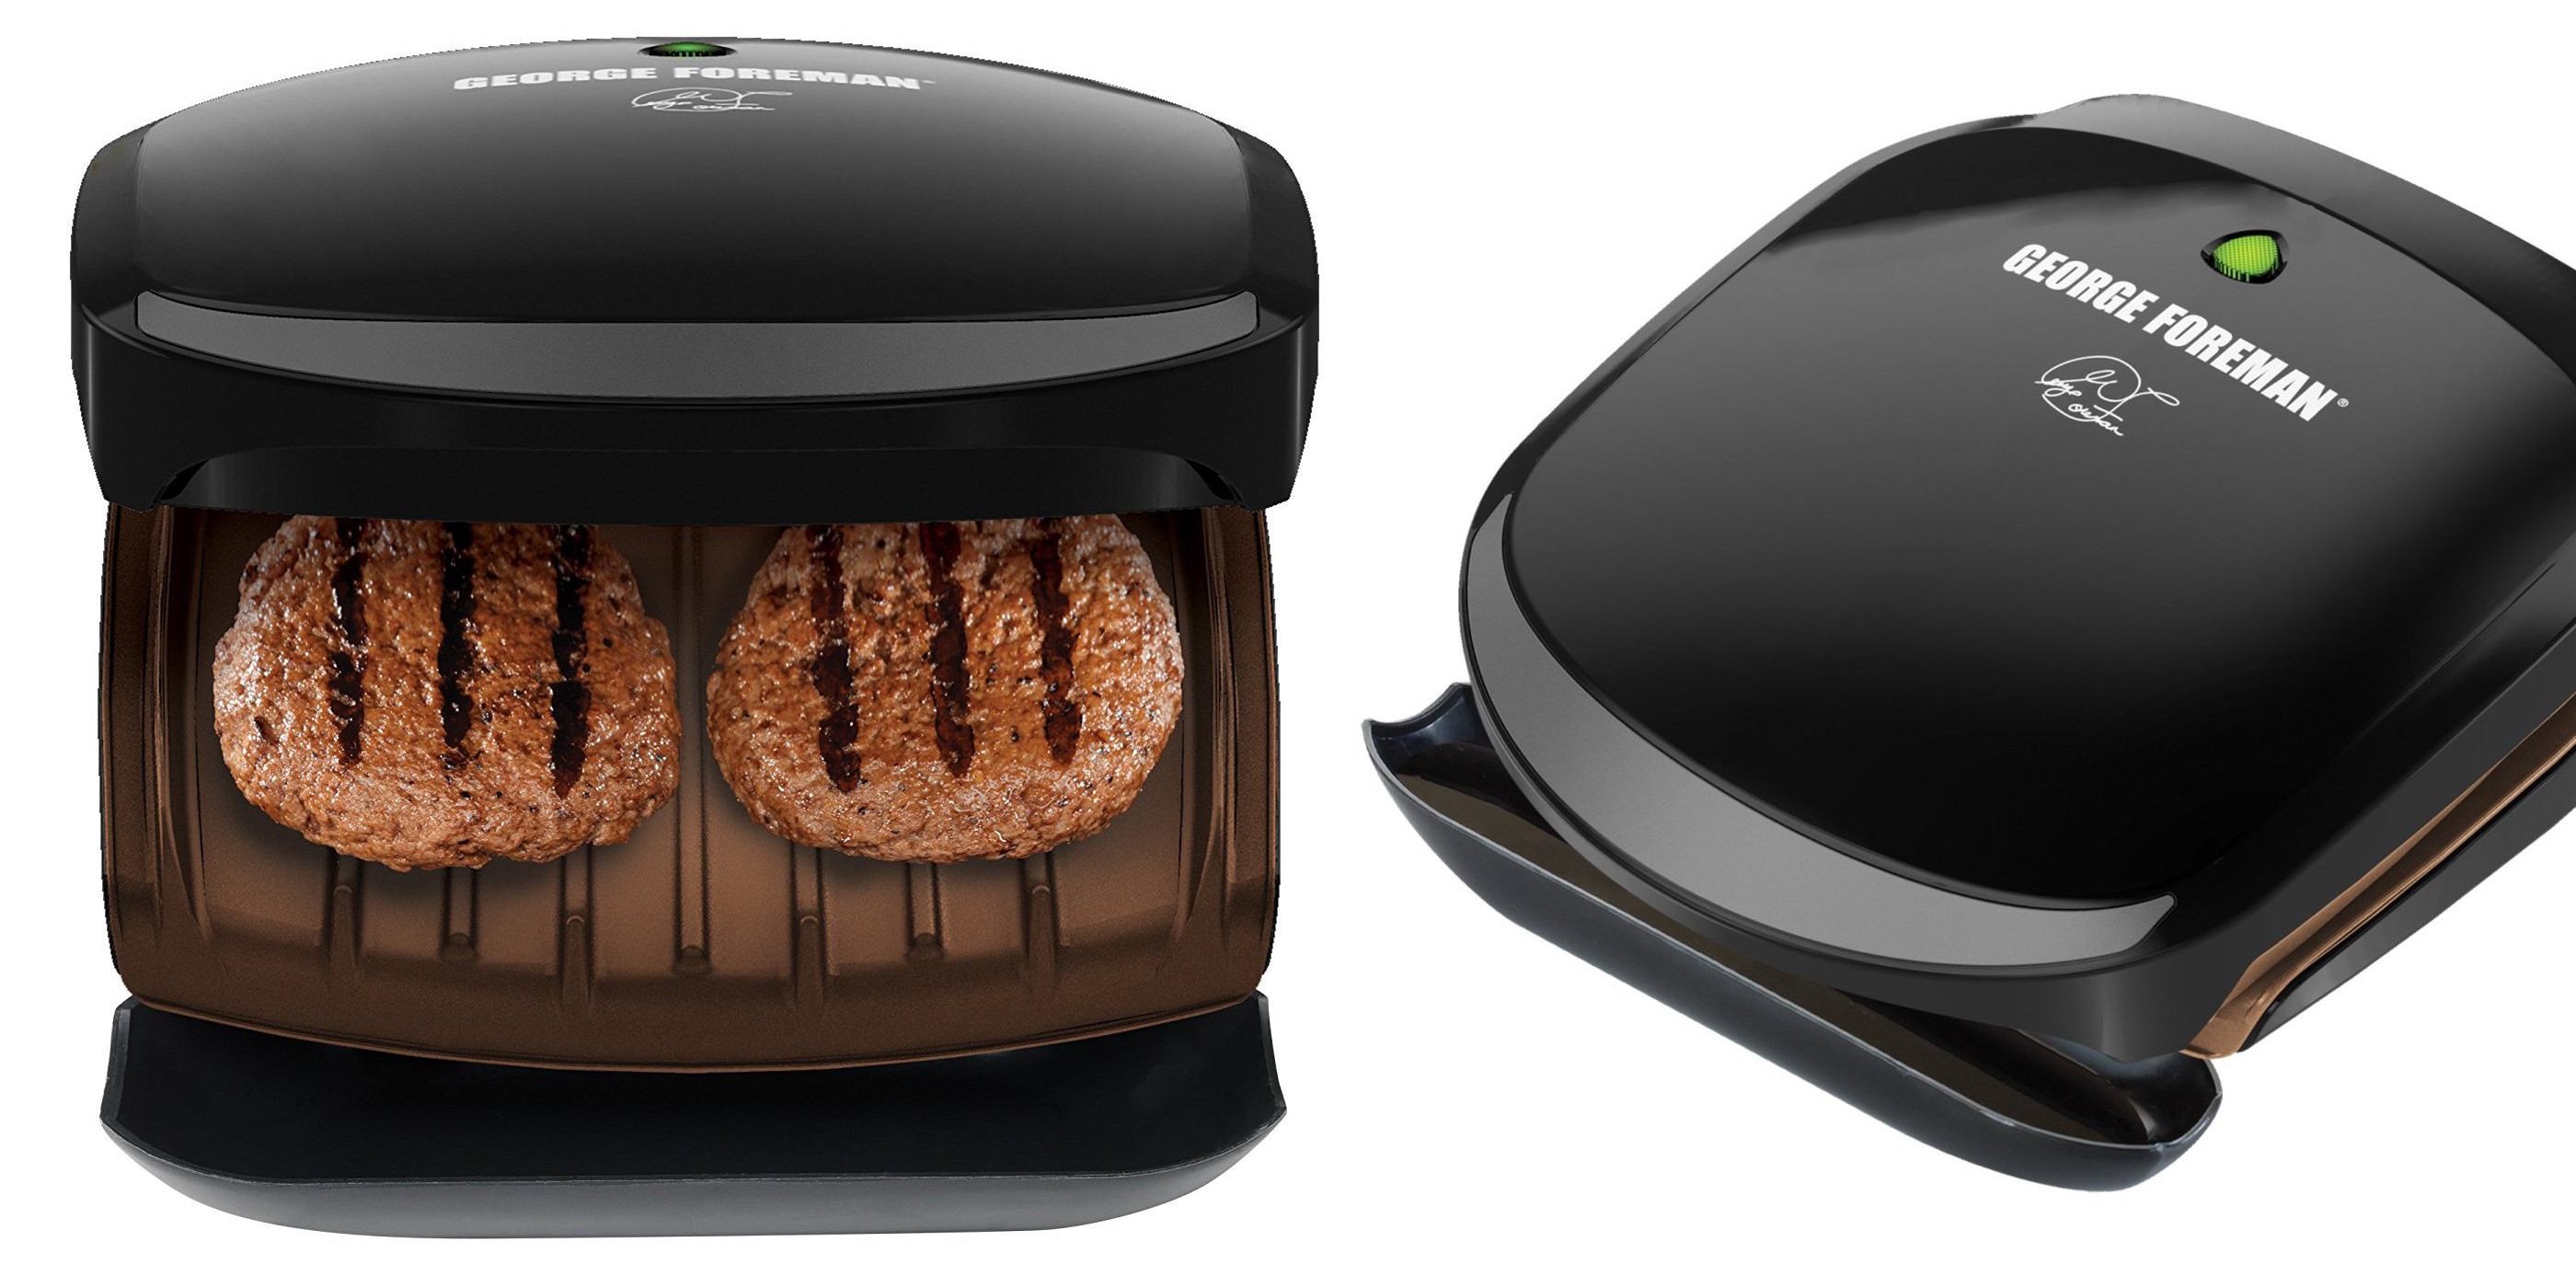 George Foreman Grill/Panini Press down to just $12 Prime shipped